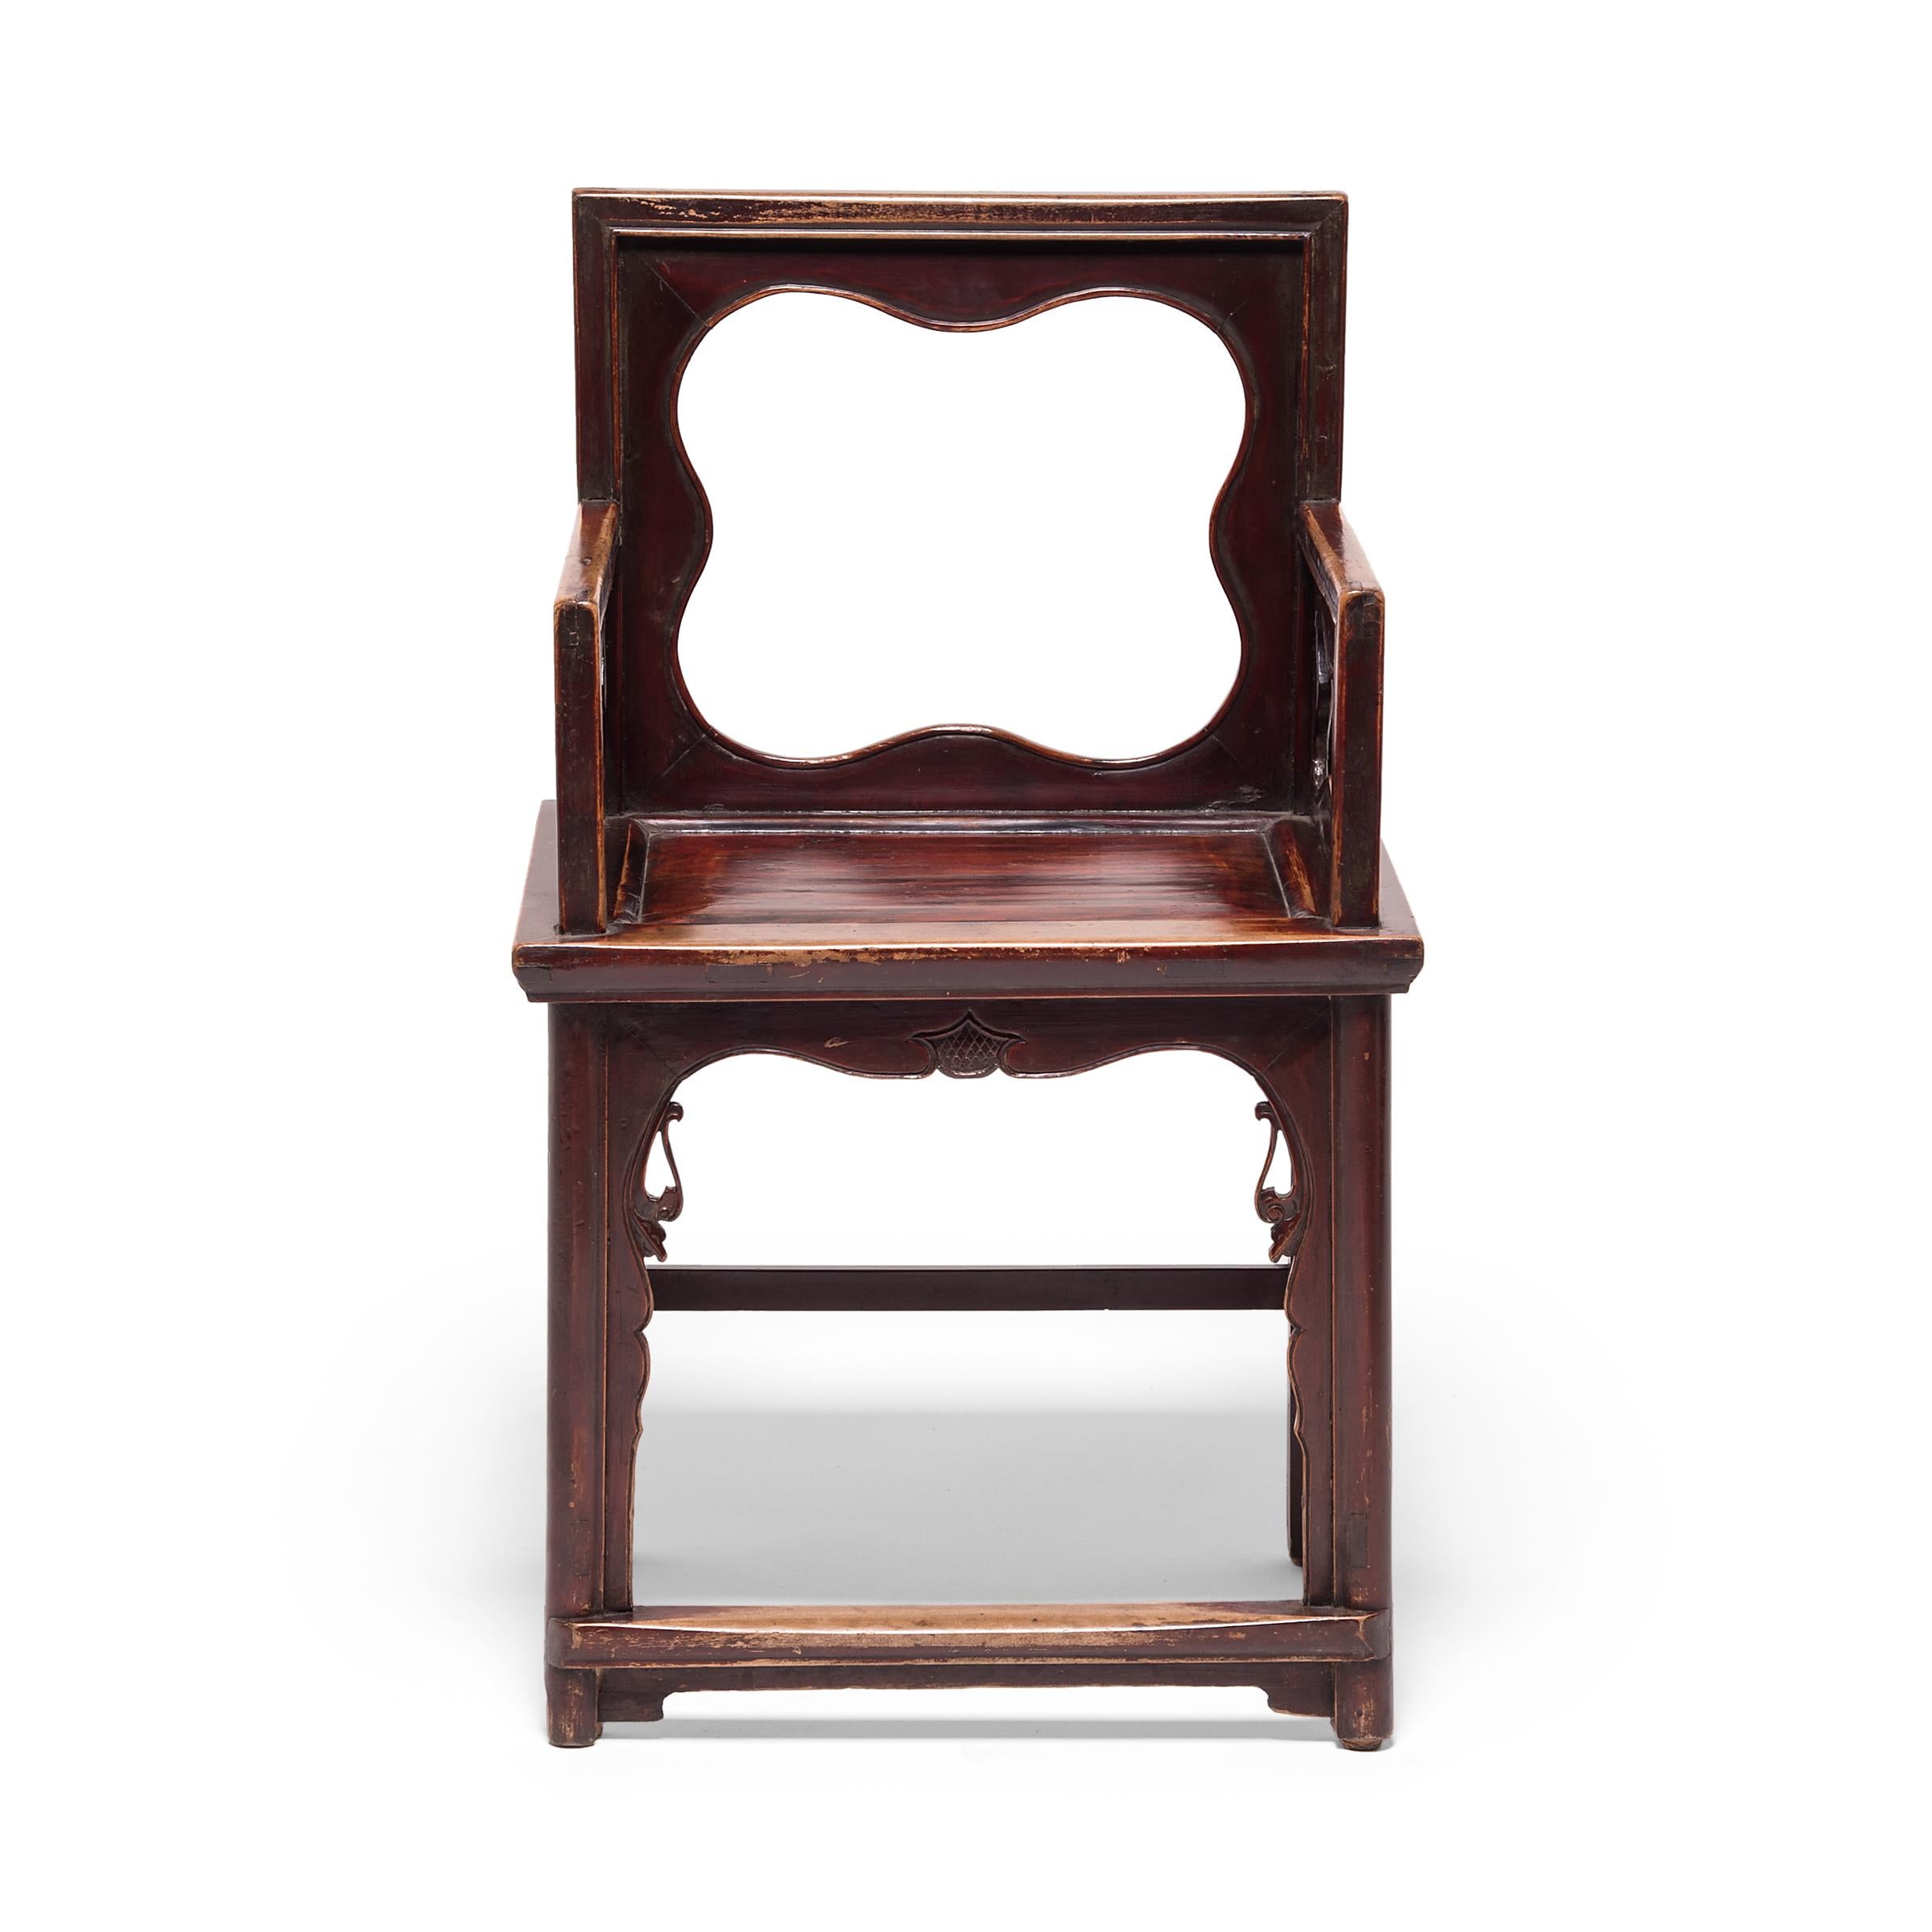 For many years, rose chairs were thought to have been exclusively used by women due to their floral name. However, they were a universal form of seating, typically used for writing due to their low back and small frame. This pair of 19th-century